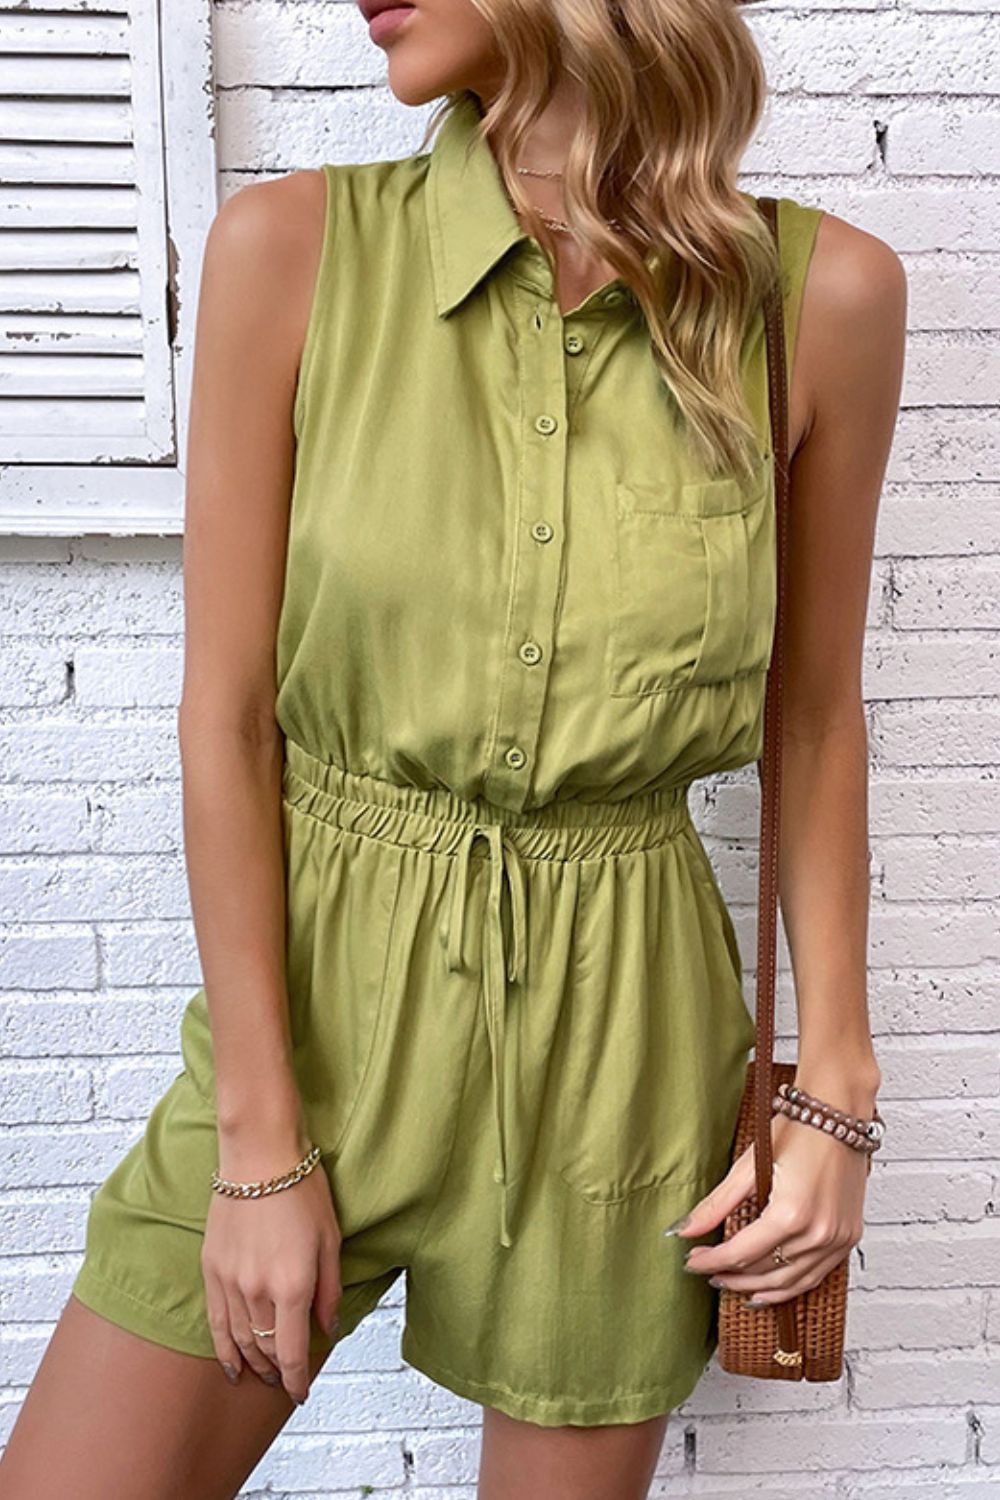 Collared Neck Sleeveless Romper with Pockets Playsuit  Sunset and Swim   